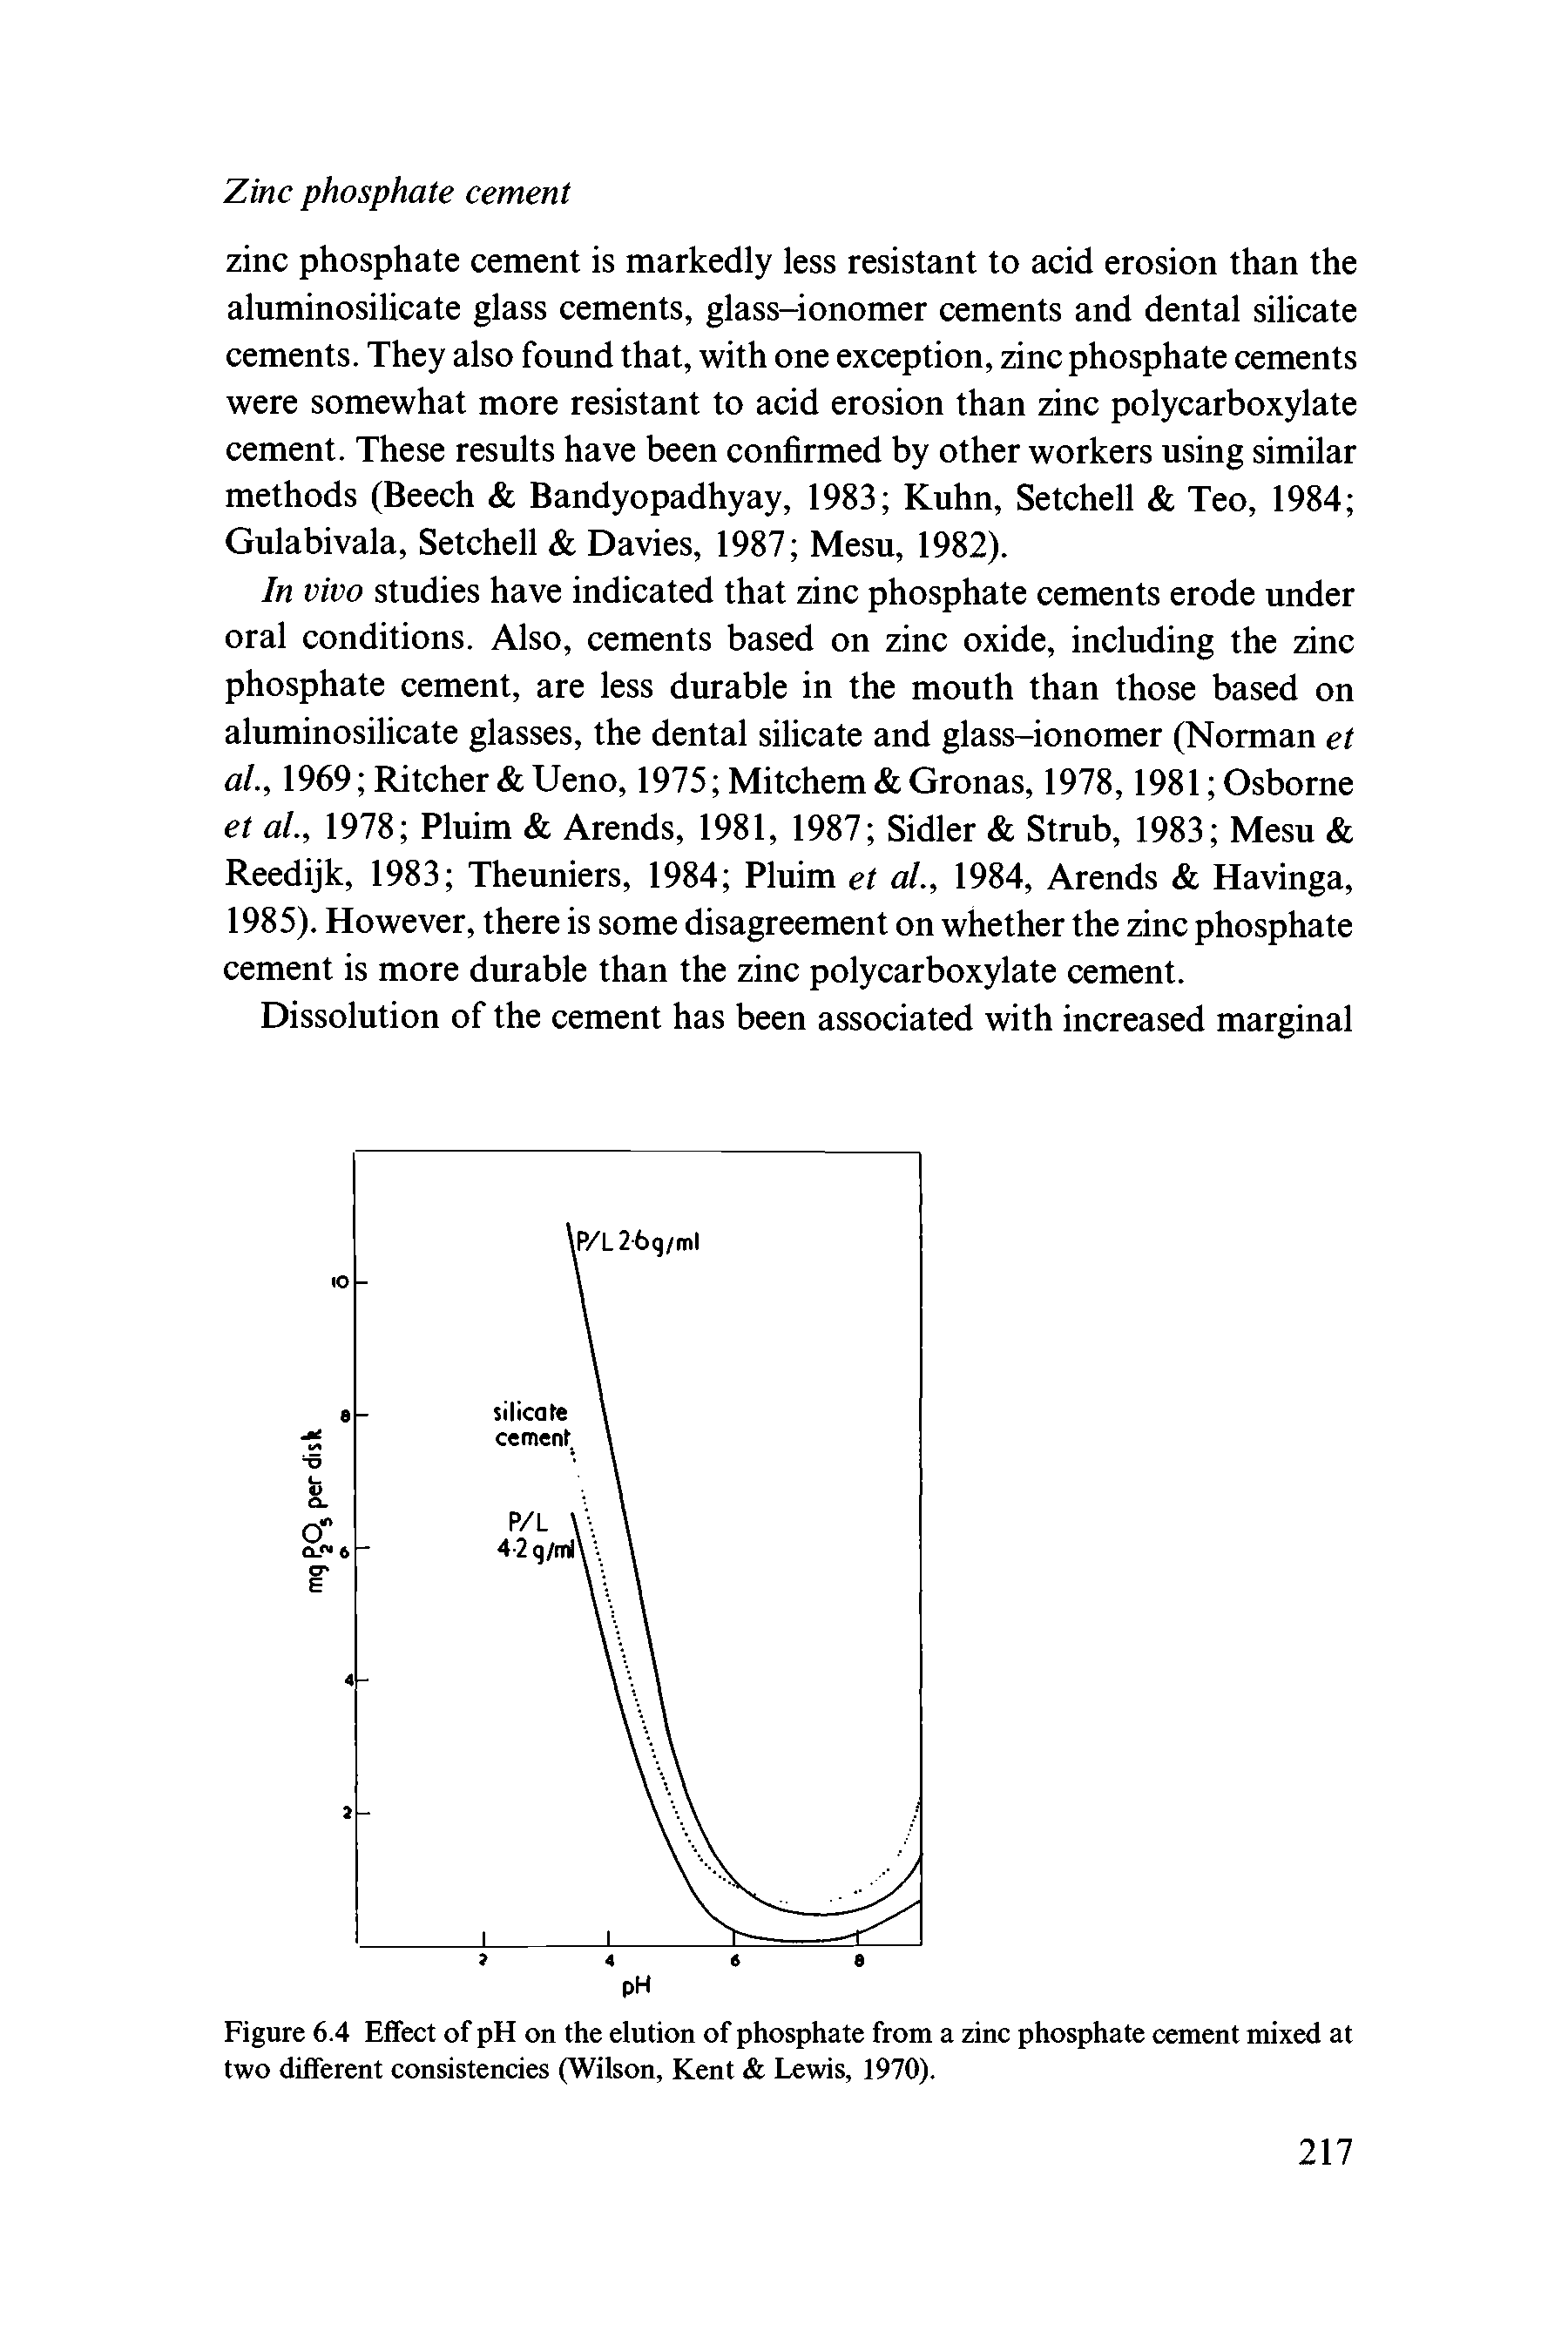 Figure 6.4 Effect of pH on the elution of phosphate from a zinc phosphate cement mixed at two different consistencies (Wilson, Kent Lewis, 1970).